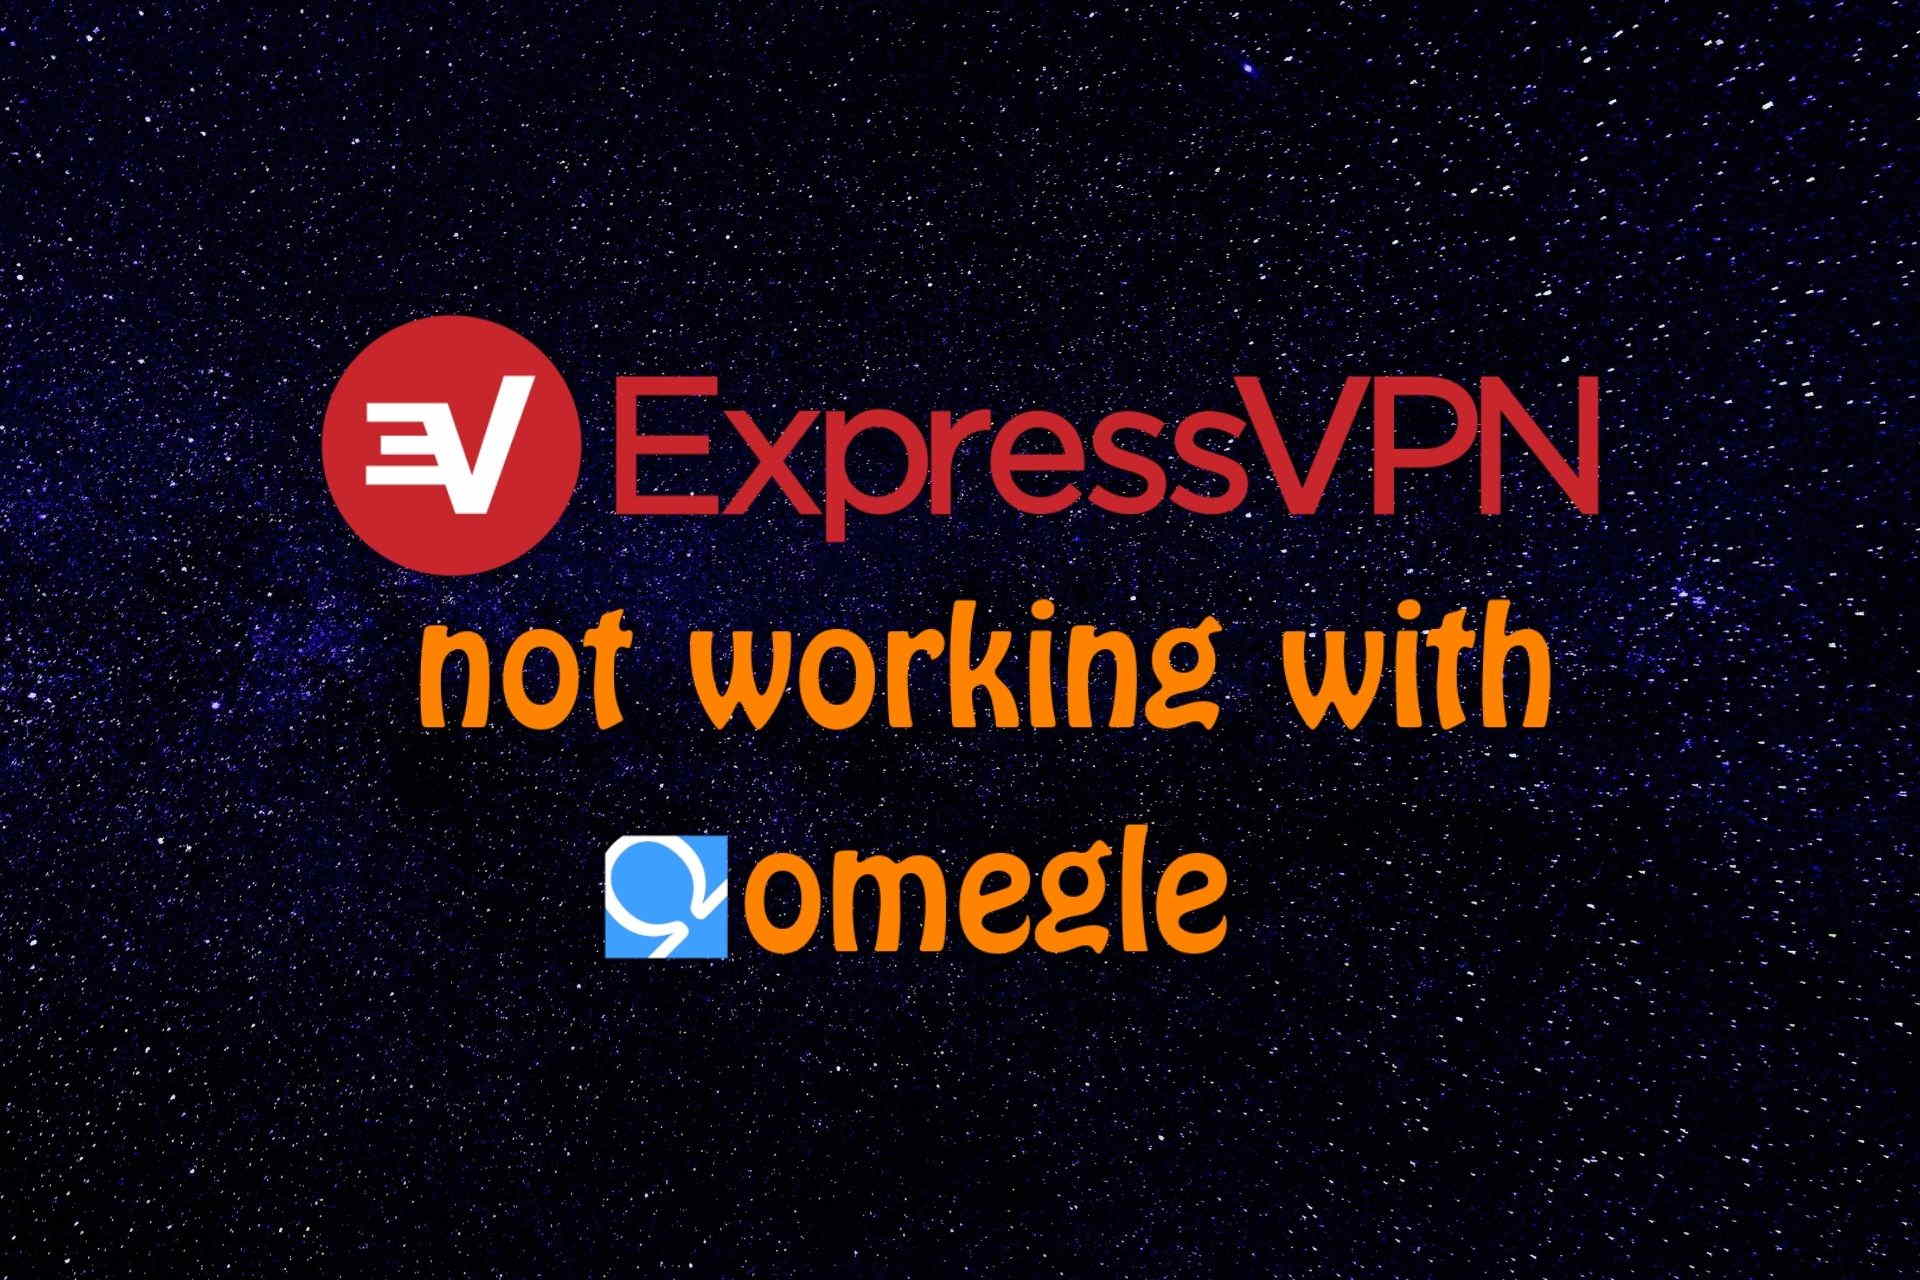 ExpressVPN not working with Omegle